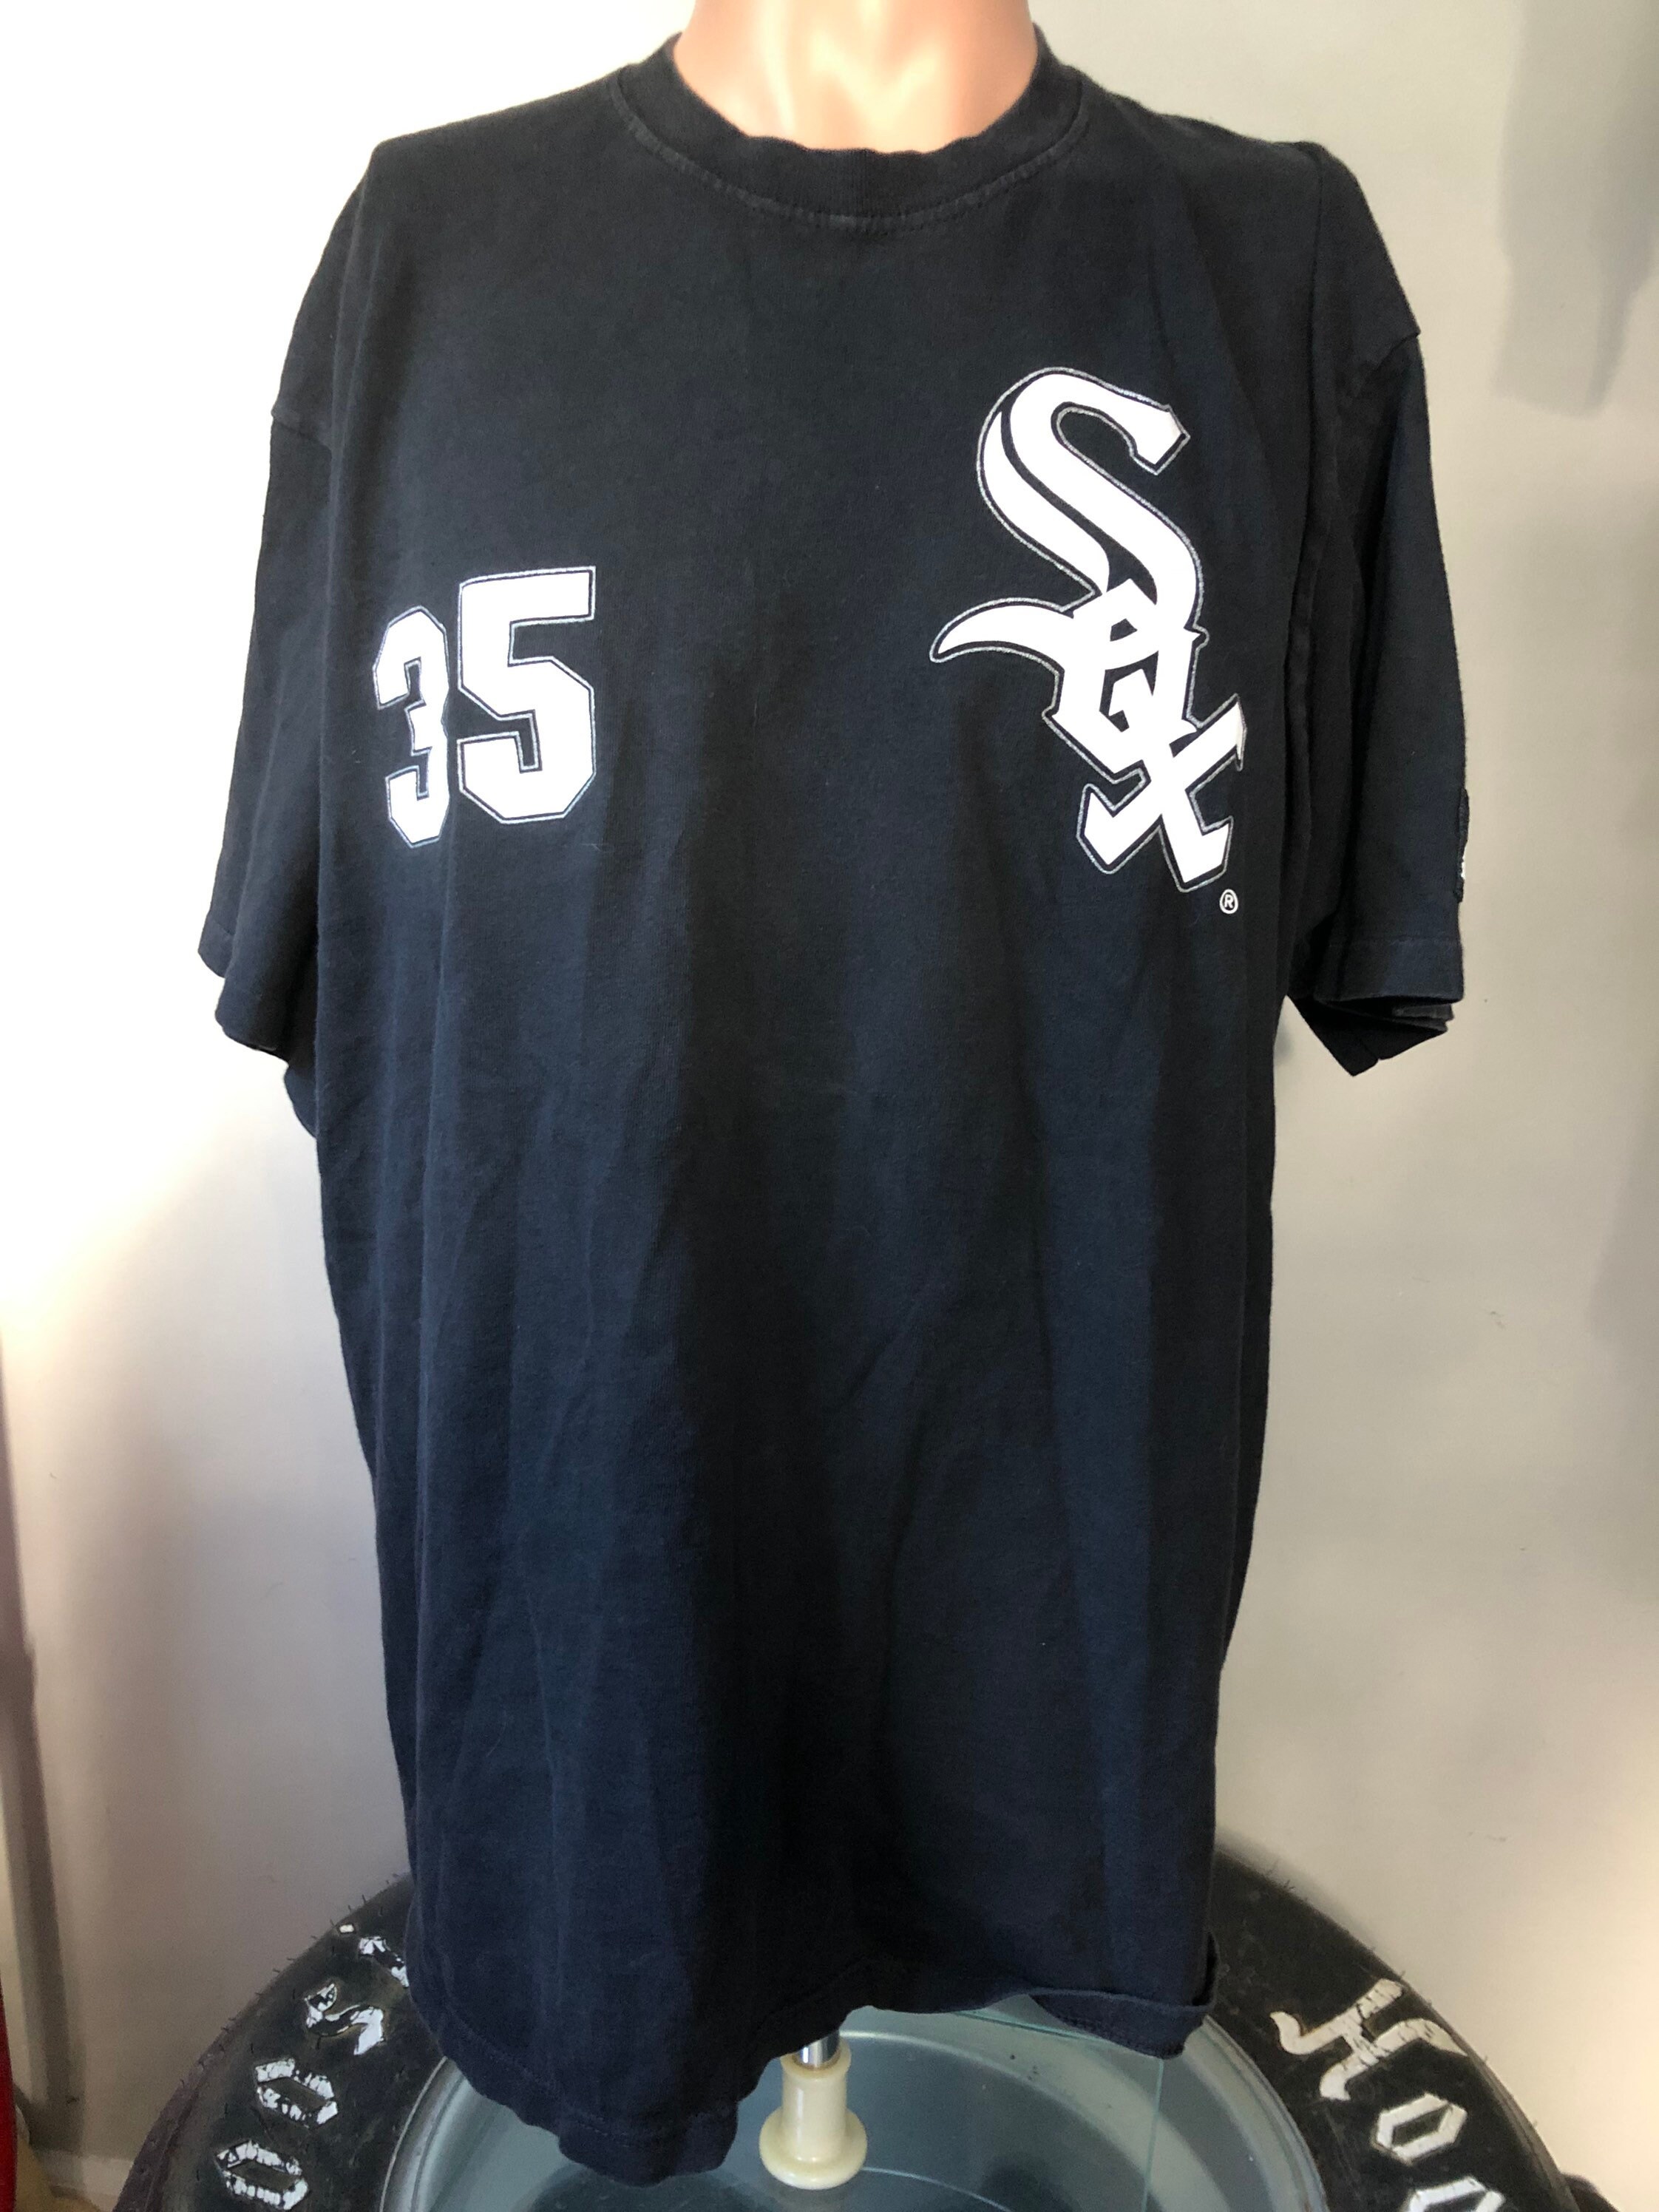 Youth Black Chicago White Sox Tie-Dye T-Shirt Size: Large